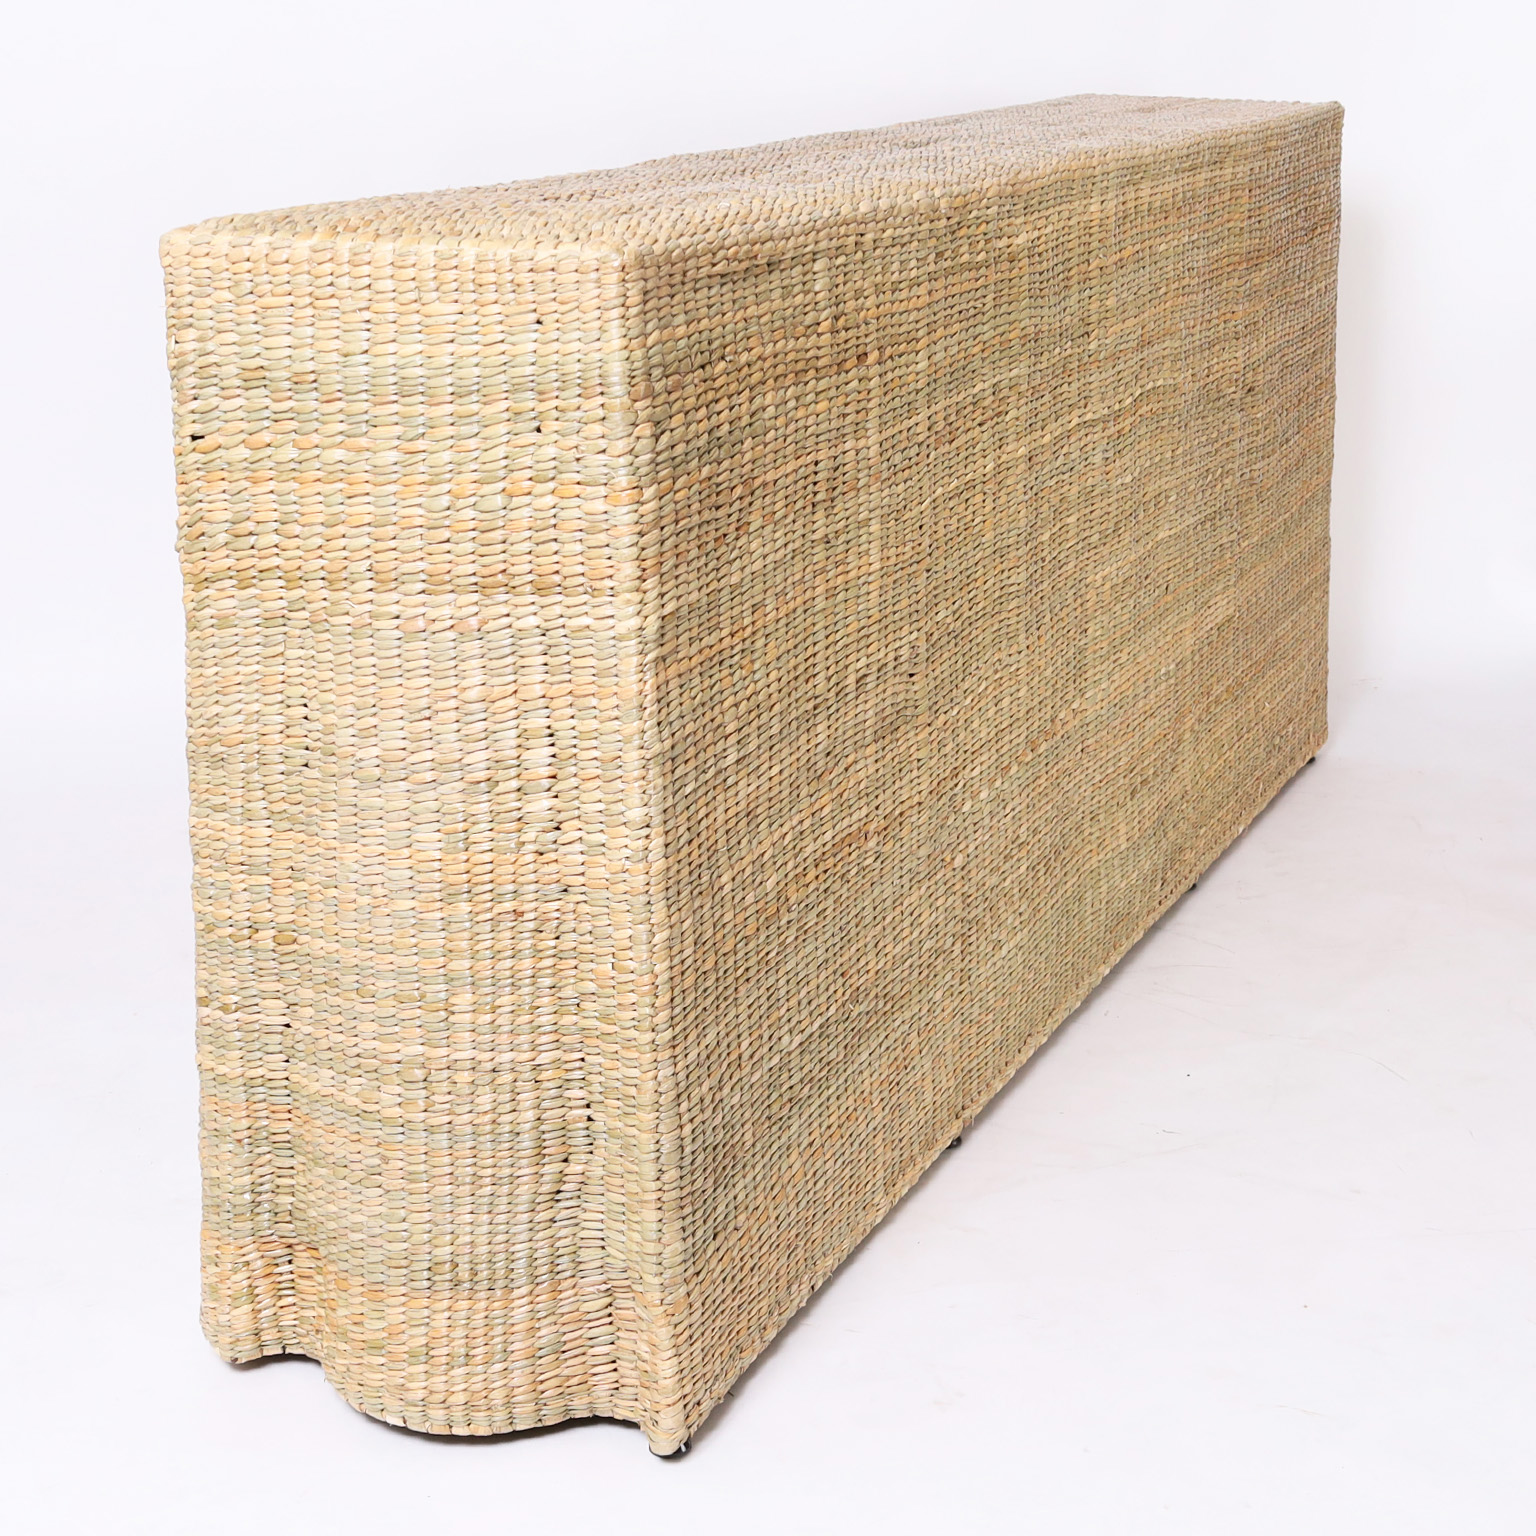 The Bali Long Woven Reed Ghost Drapery Console with Flat Back from the FS Flores Collection